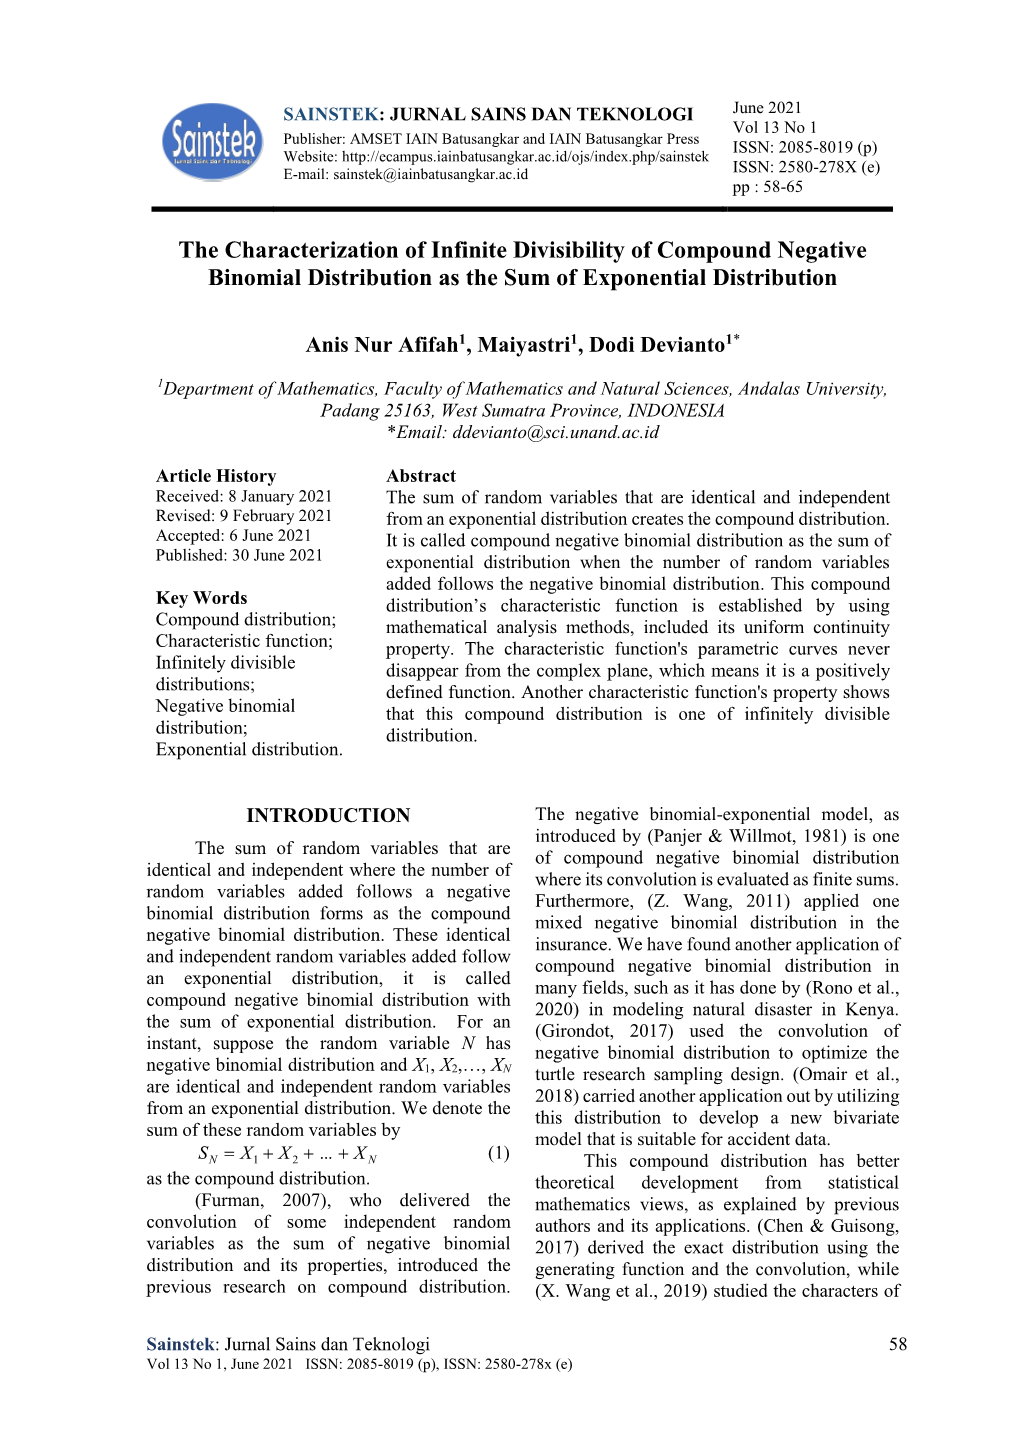 The Characterization of Infinite Divisibility of Compound Negative Binomial Distribution As the Sum of Exponential Distribution